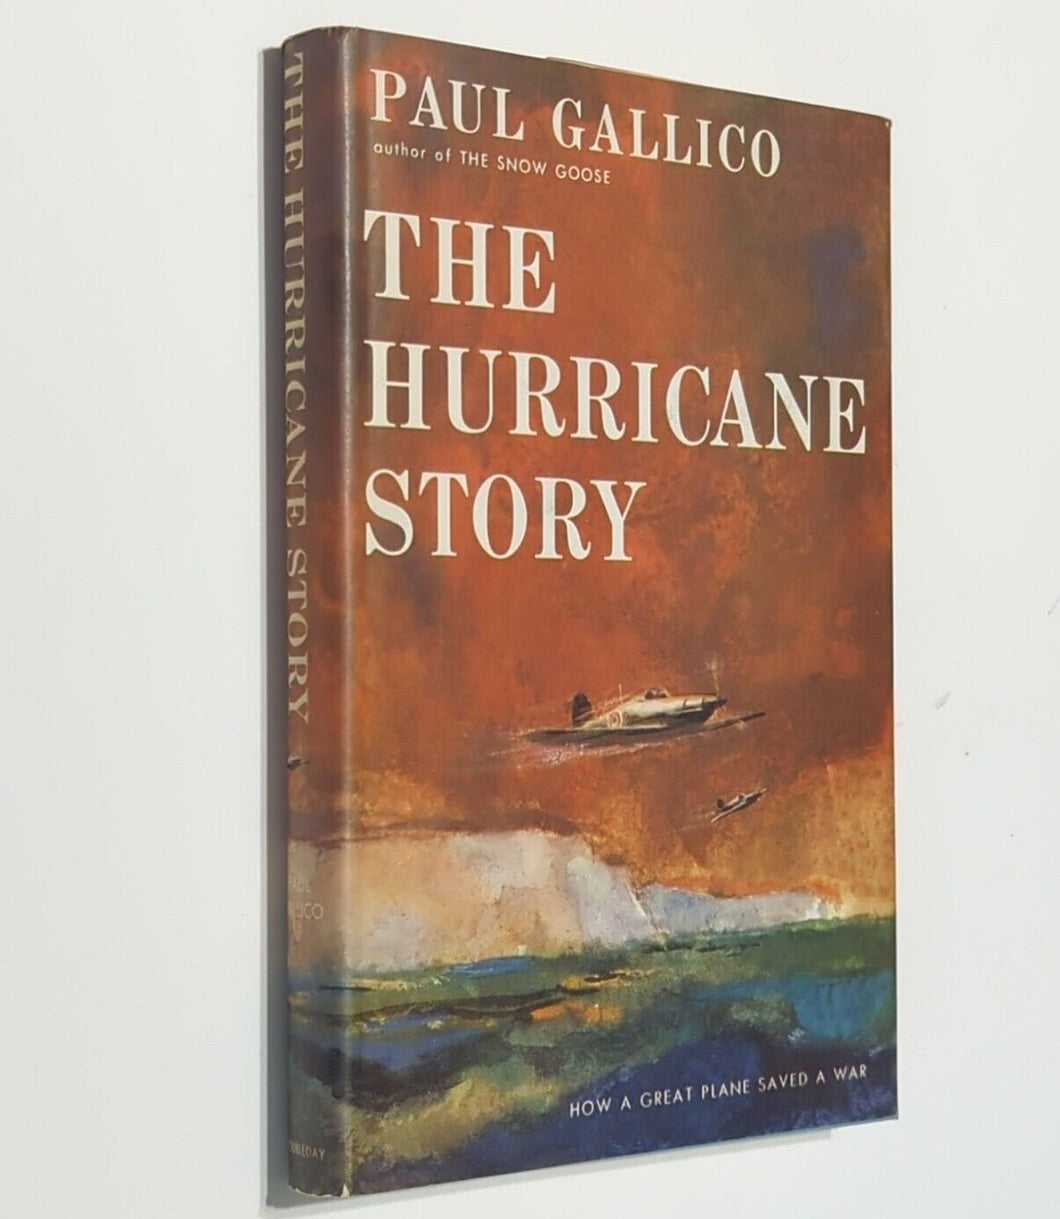 The Hurricane Story By Paul Gallico Battle Of Britain Vintage WWII WW2 Book 1959